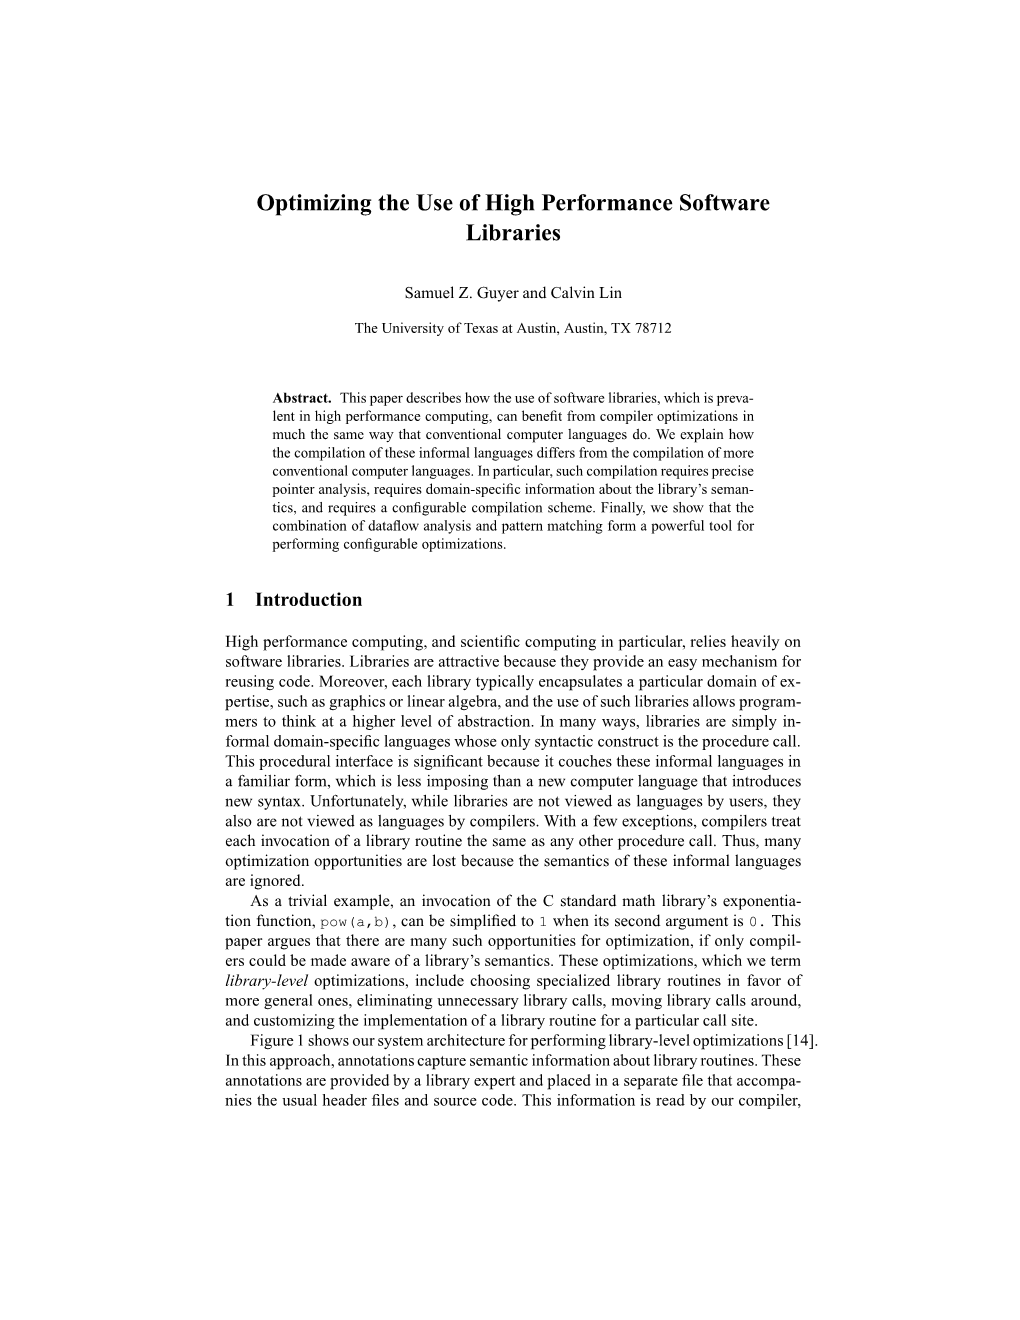 Optimizing the Use of High Performance Software Libraries